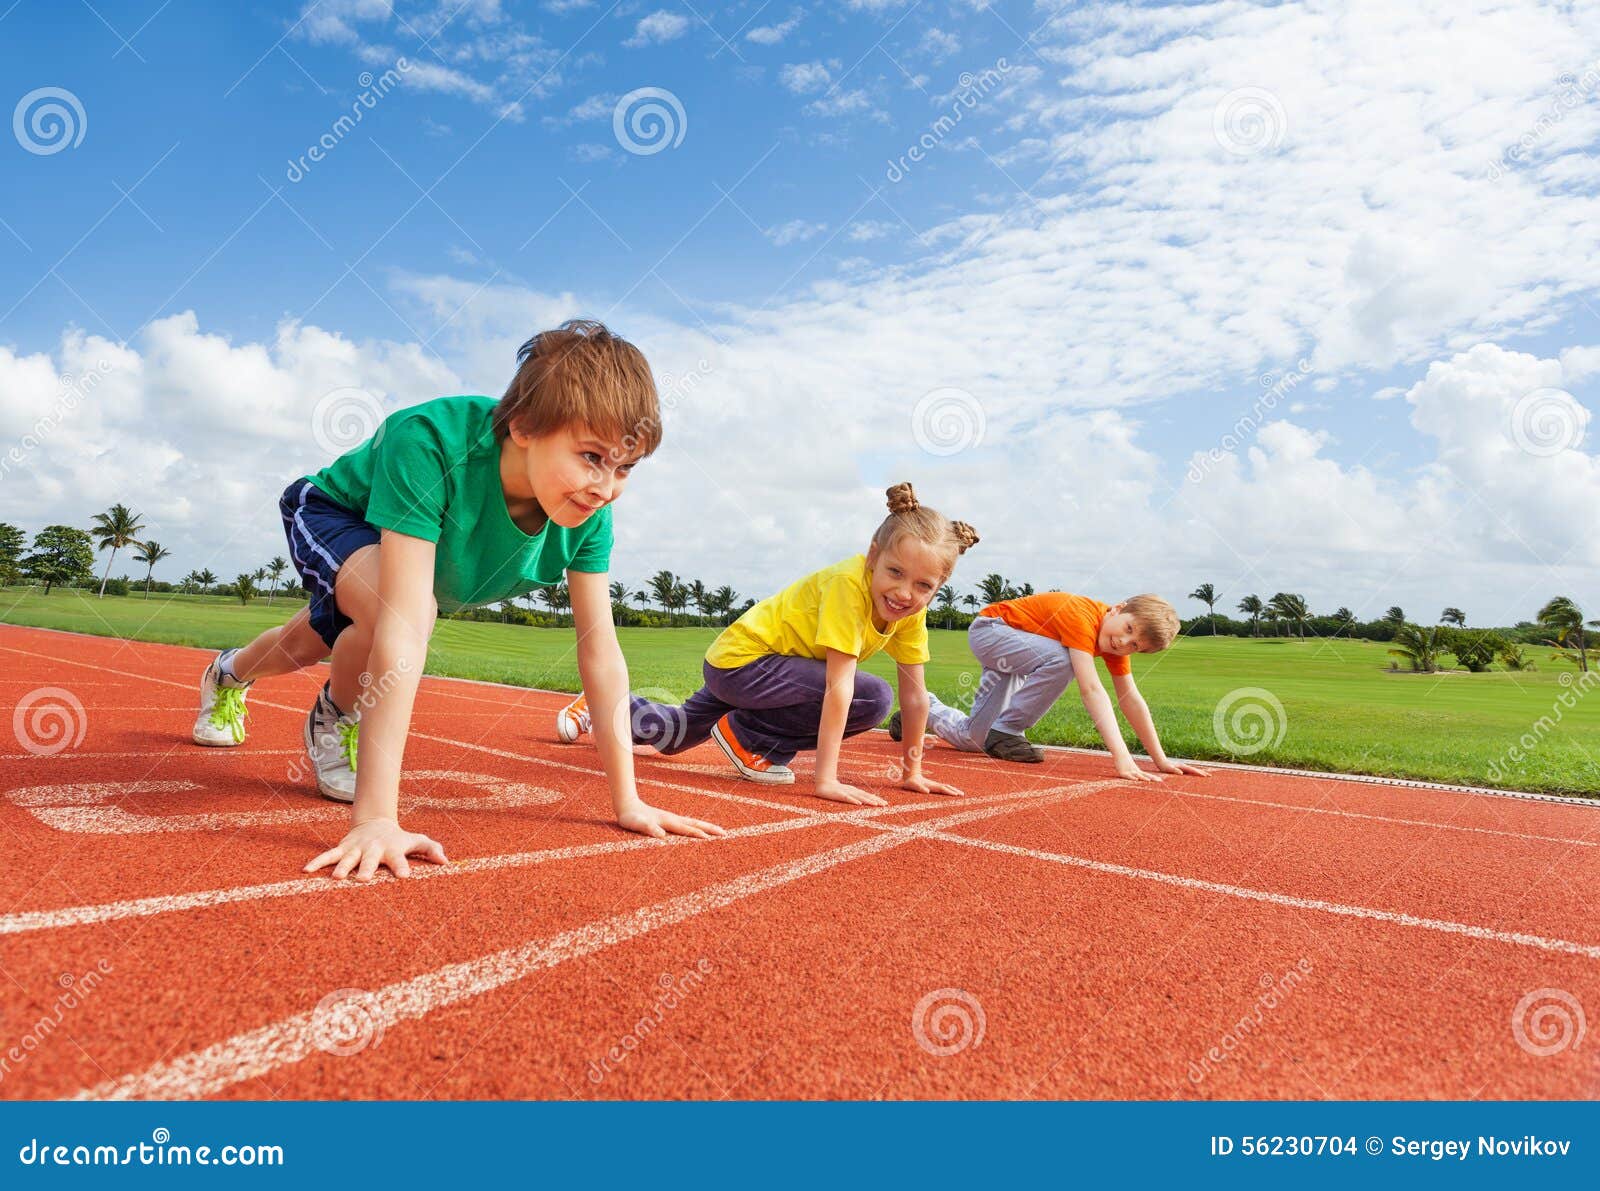 kids in uniforms on bended knee ready to run